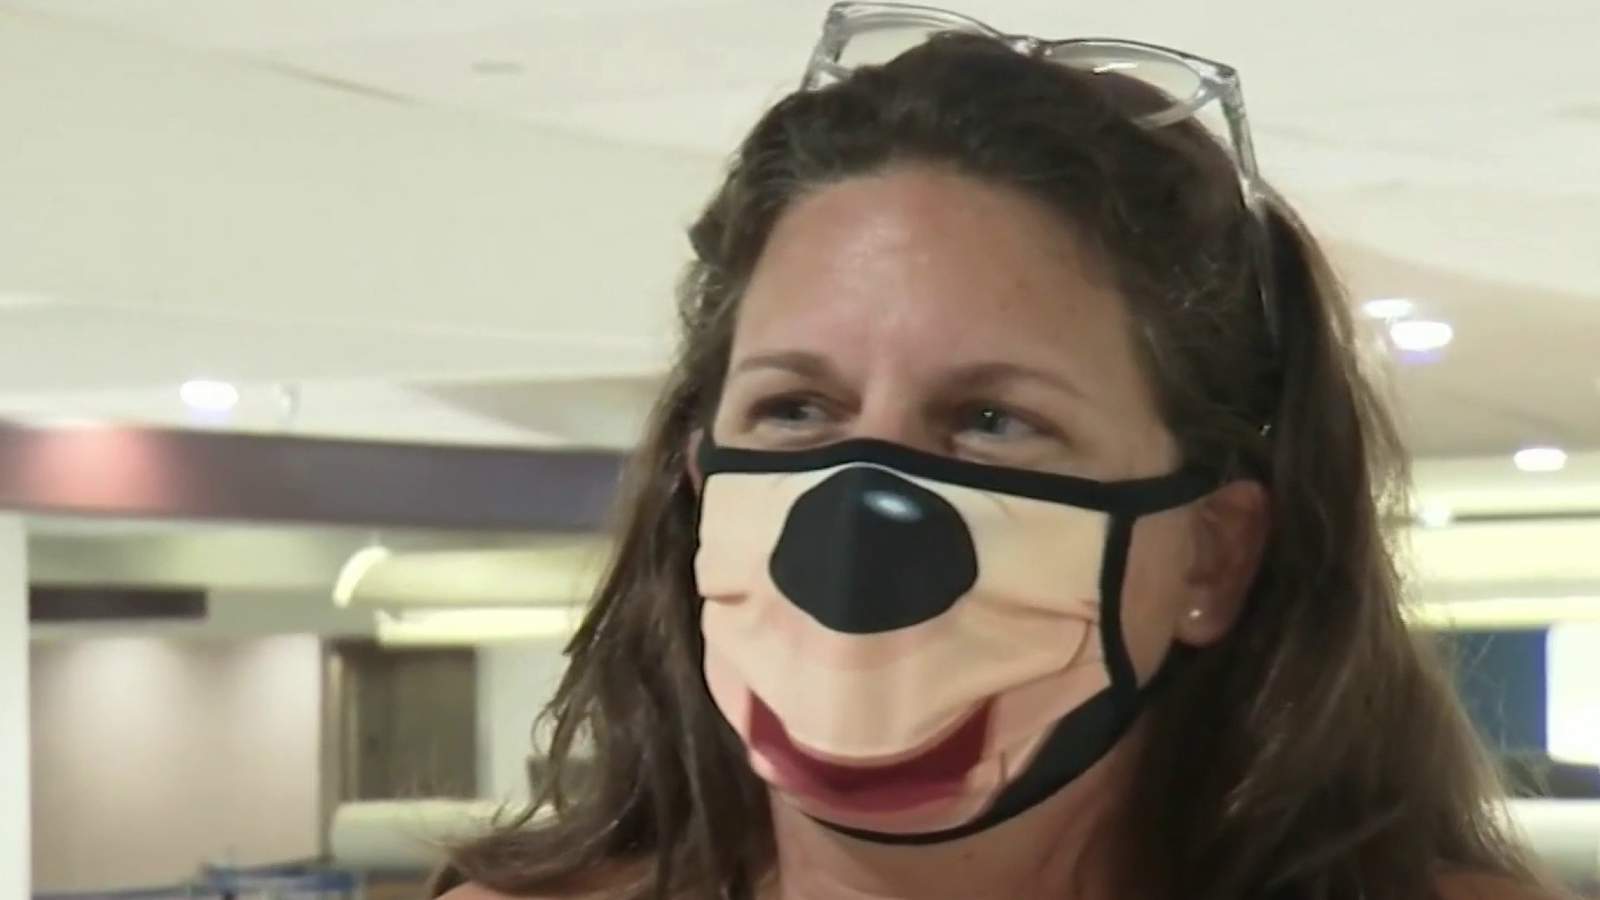 Know before you go: Disney to require face masks with ear loops or ties for park entry